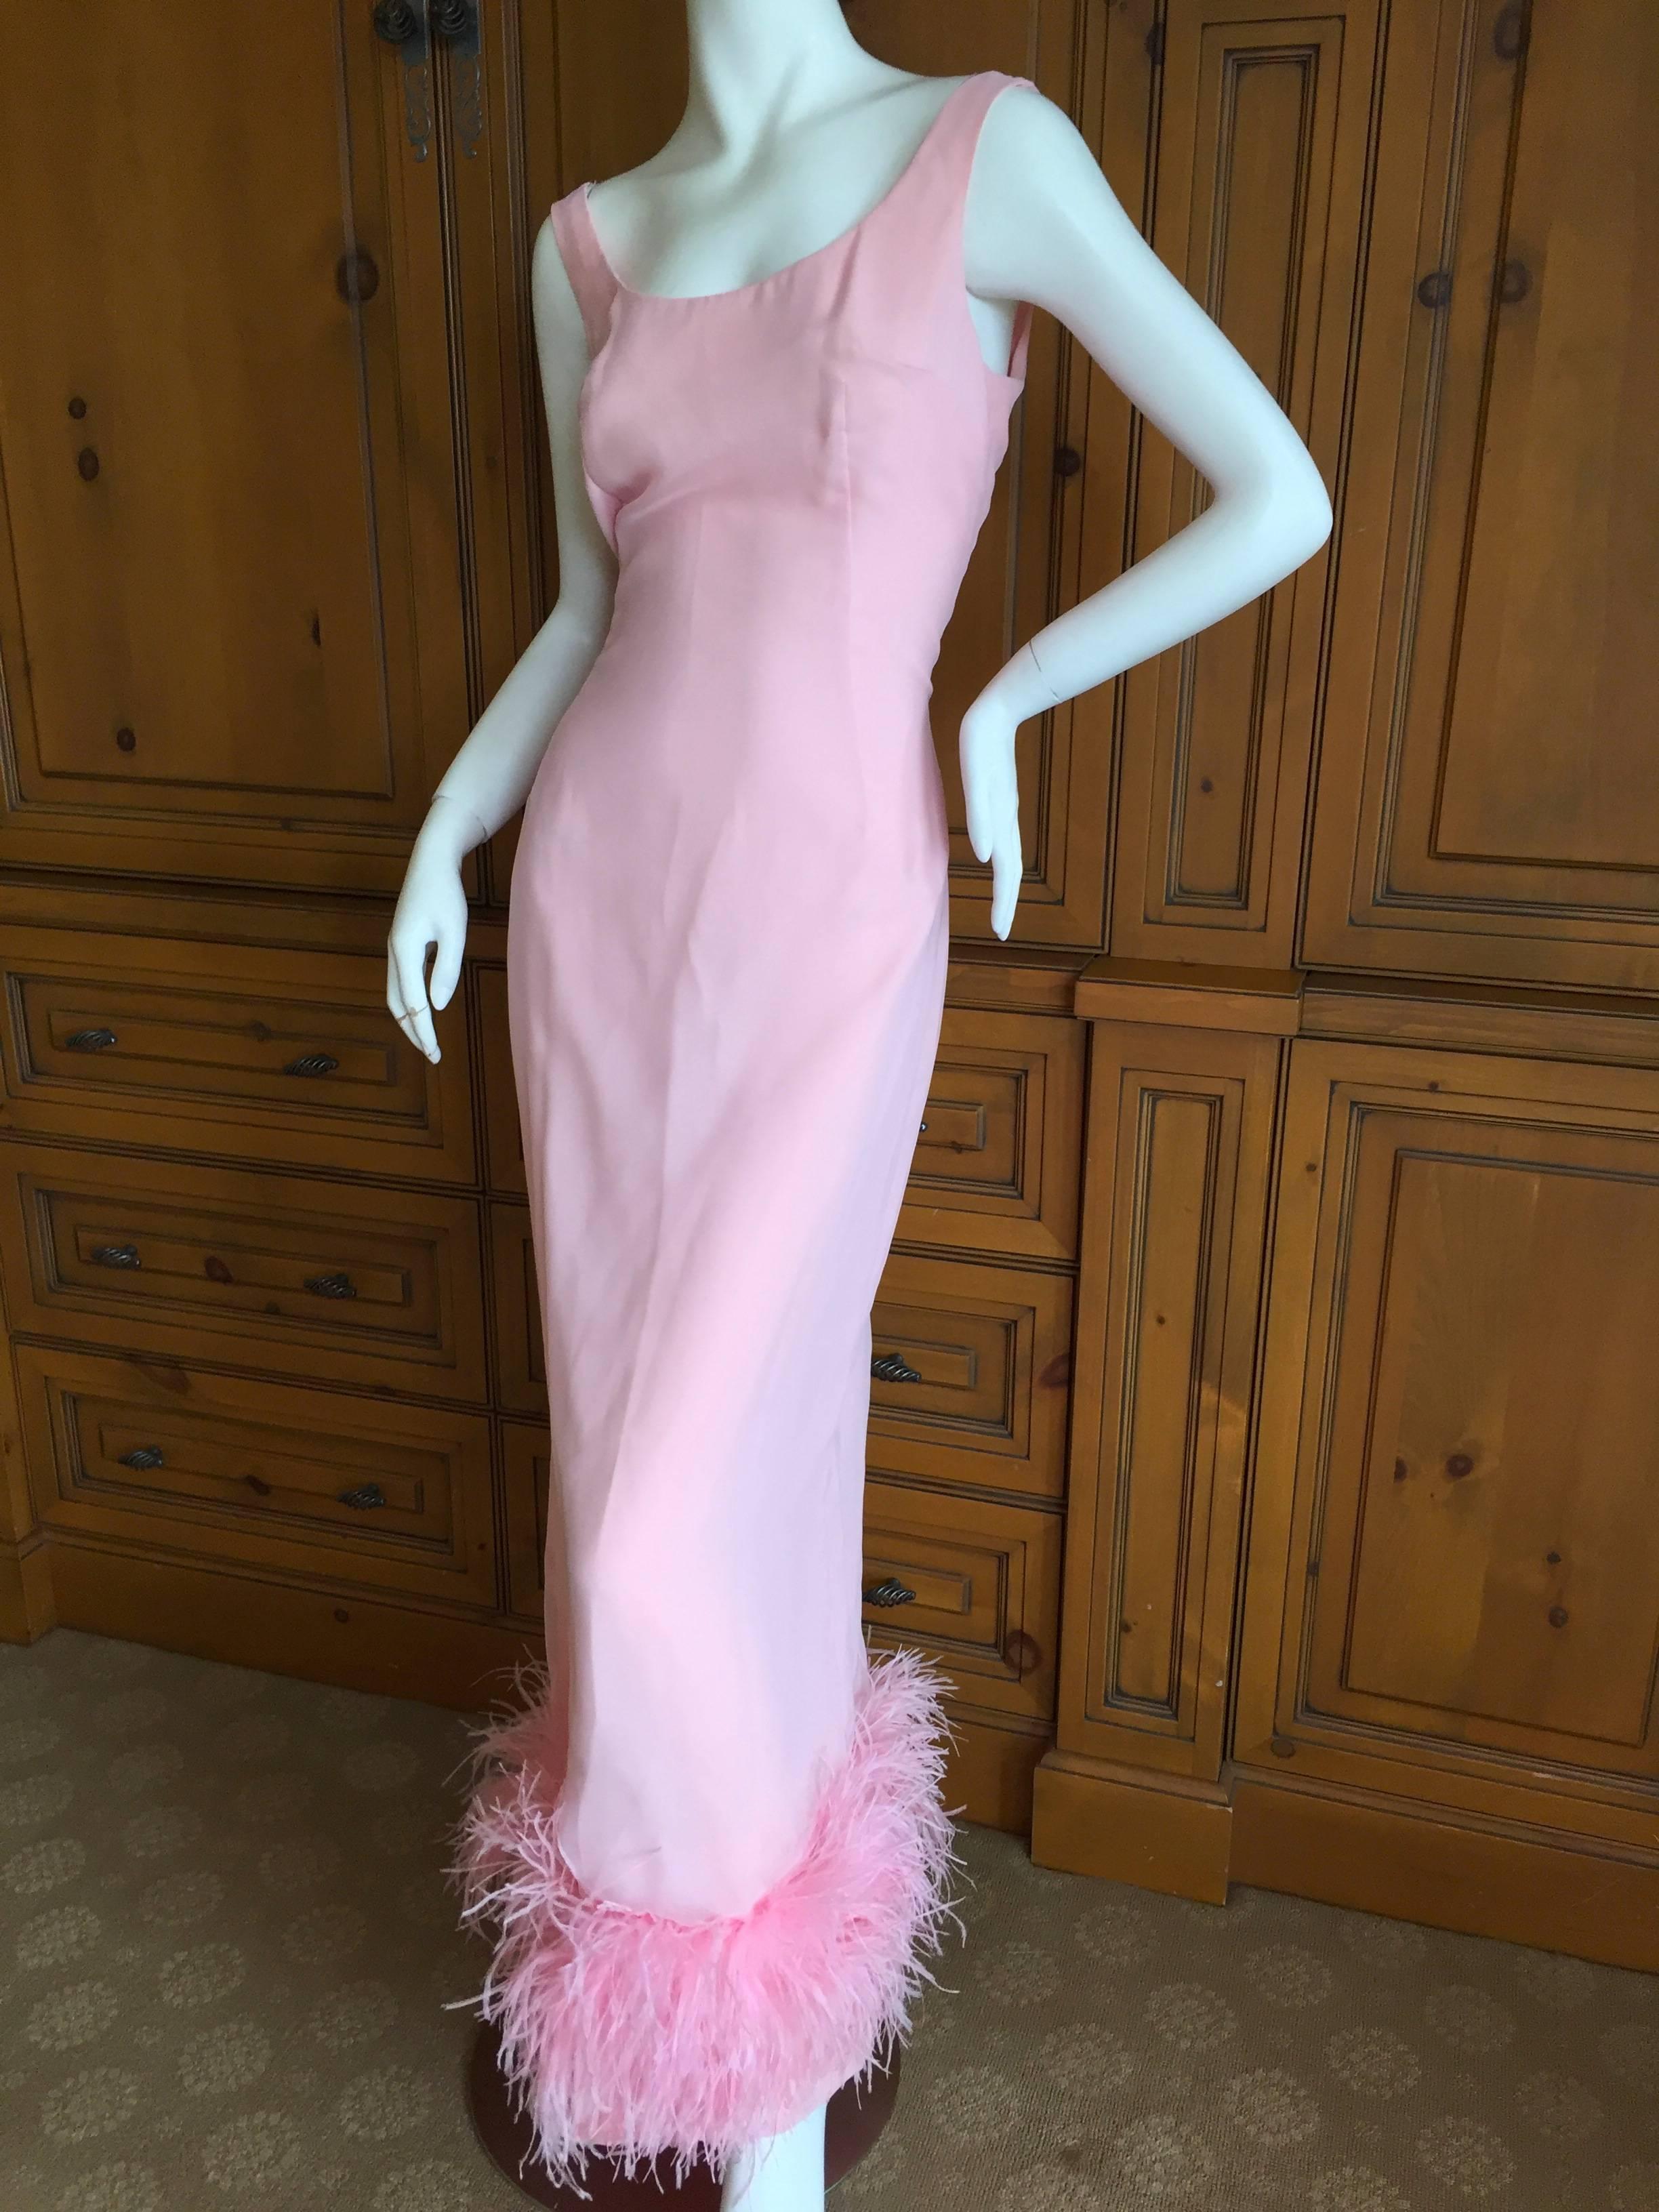 Jean Louis Couture two layer pink chiffon dress with maribou feather trim.
Sleeveless feather trim dress and matching caftan outer layer.
Jean Louis was a Hollywood designer in the 50's , 60's and early 70's.
This is such a great piece, so very